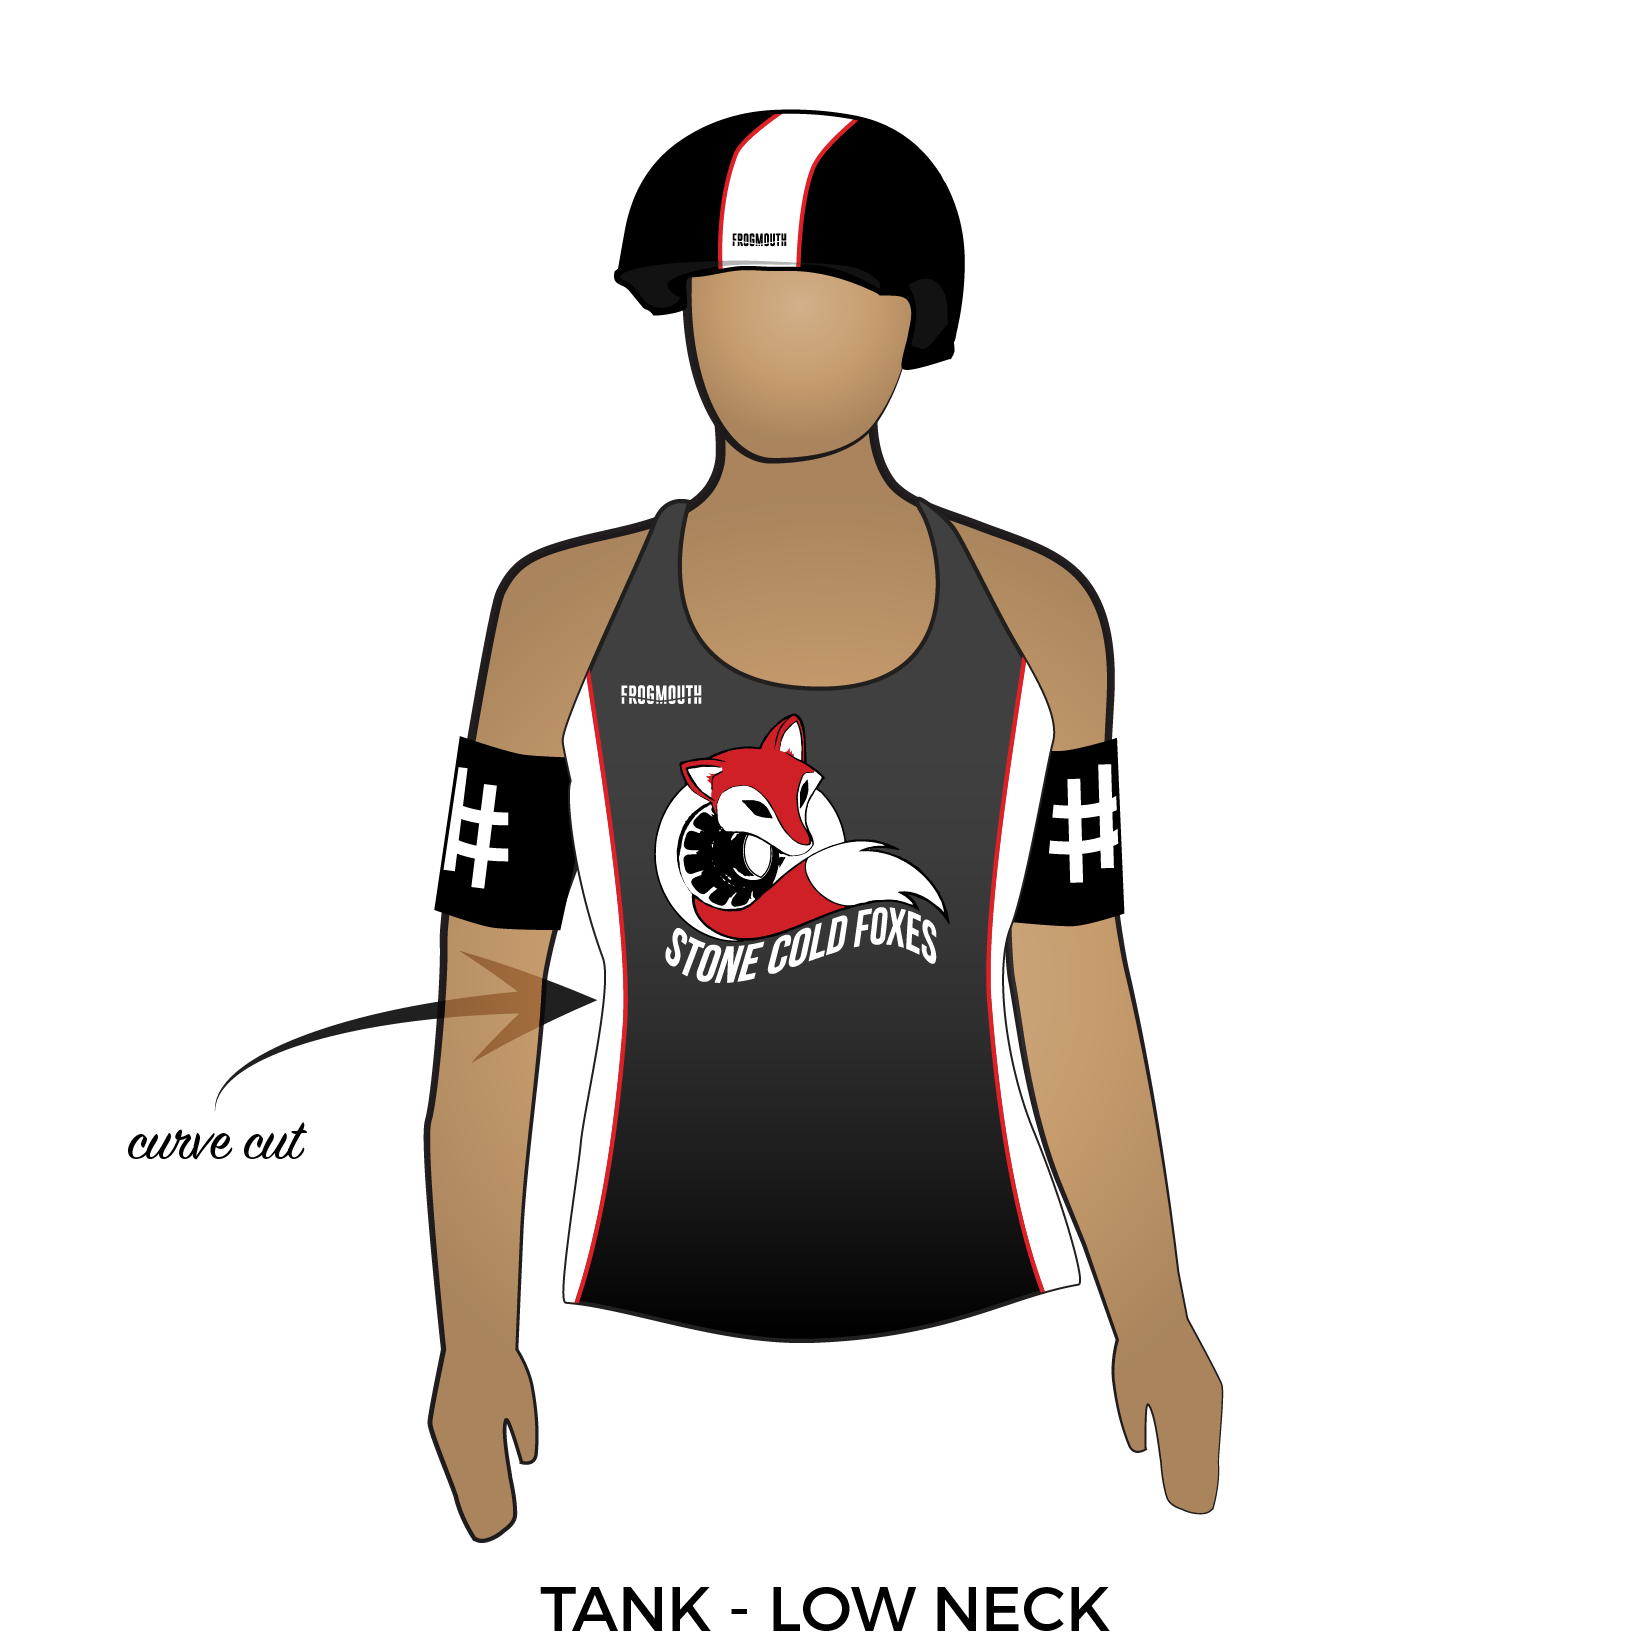 Stone Cold Foxes Roller Derby: 2017 Uniform Jersey (Black) – Frogmouth